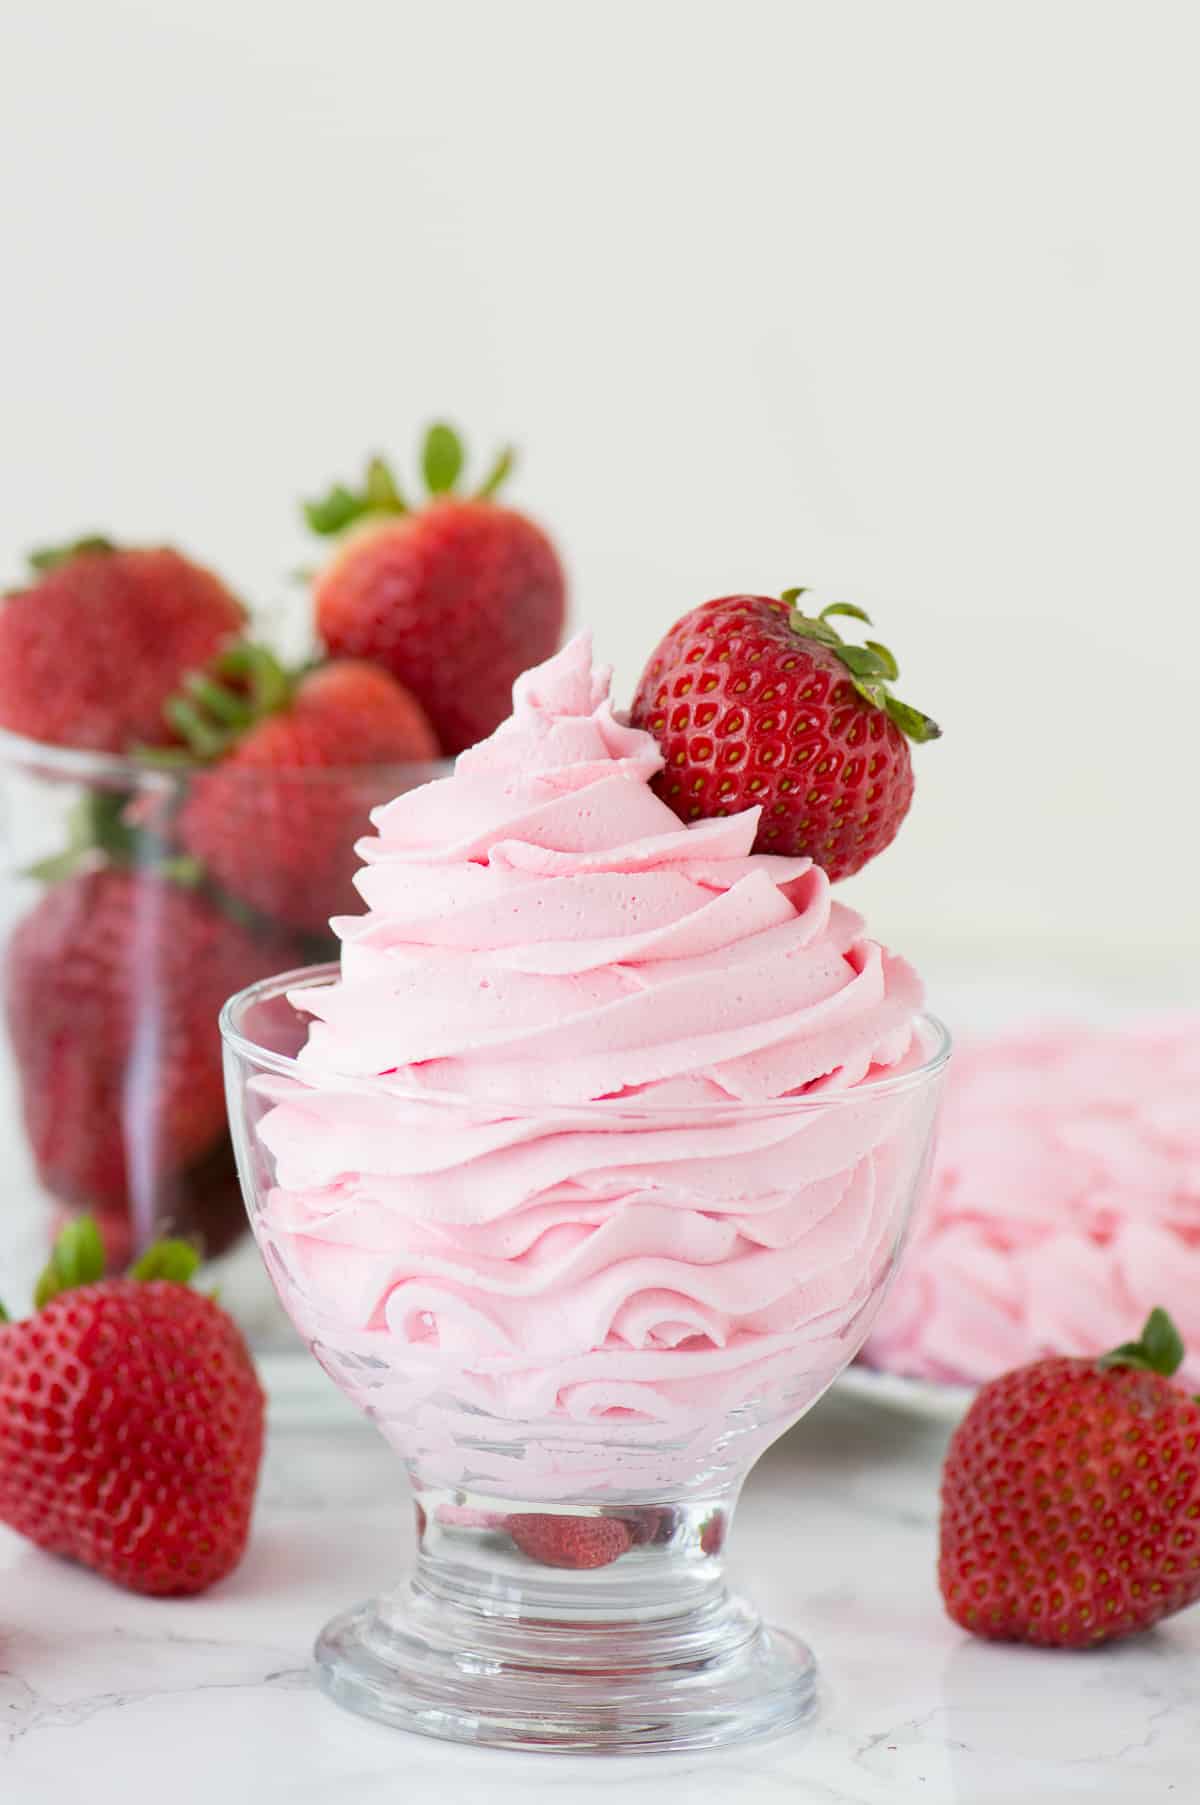 strawberry whipped cream piped into clear glass with strawberries in the background